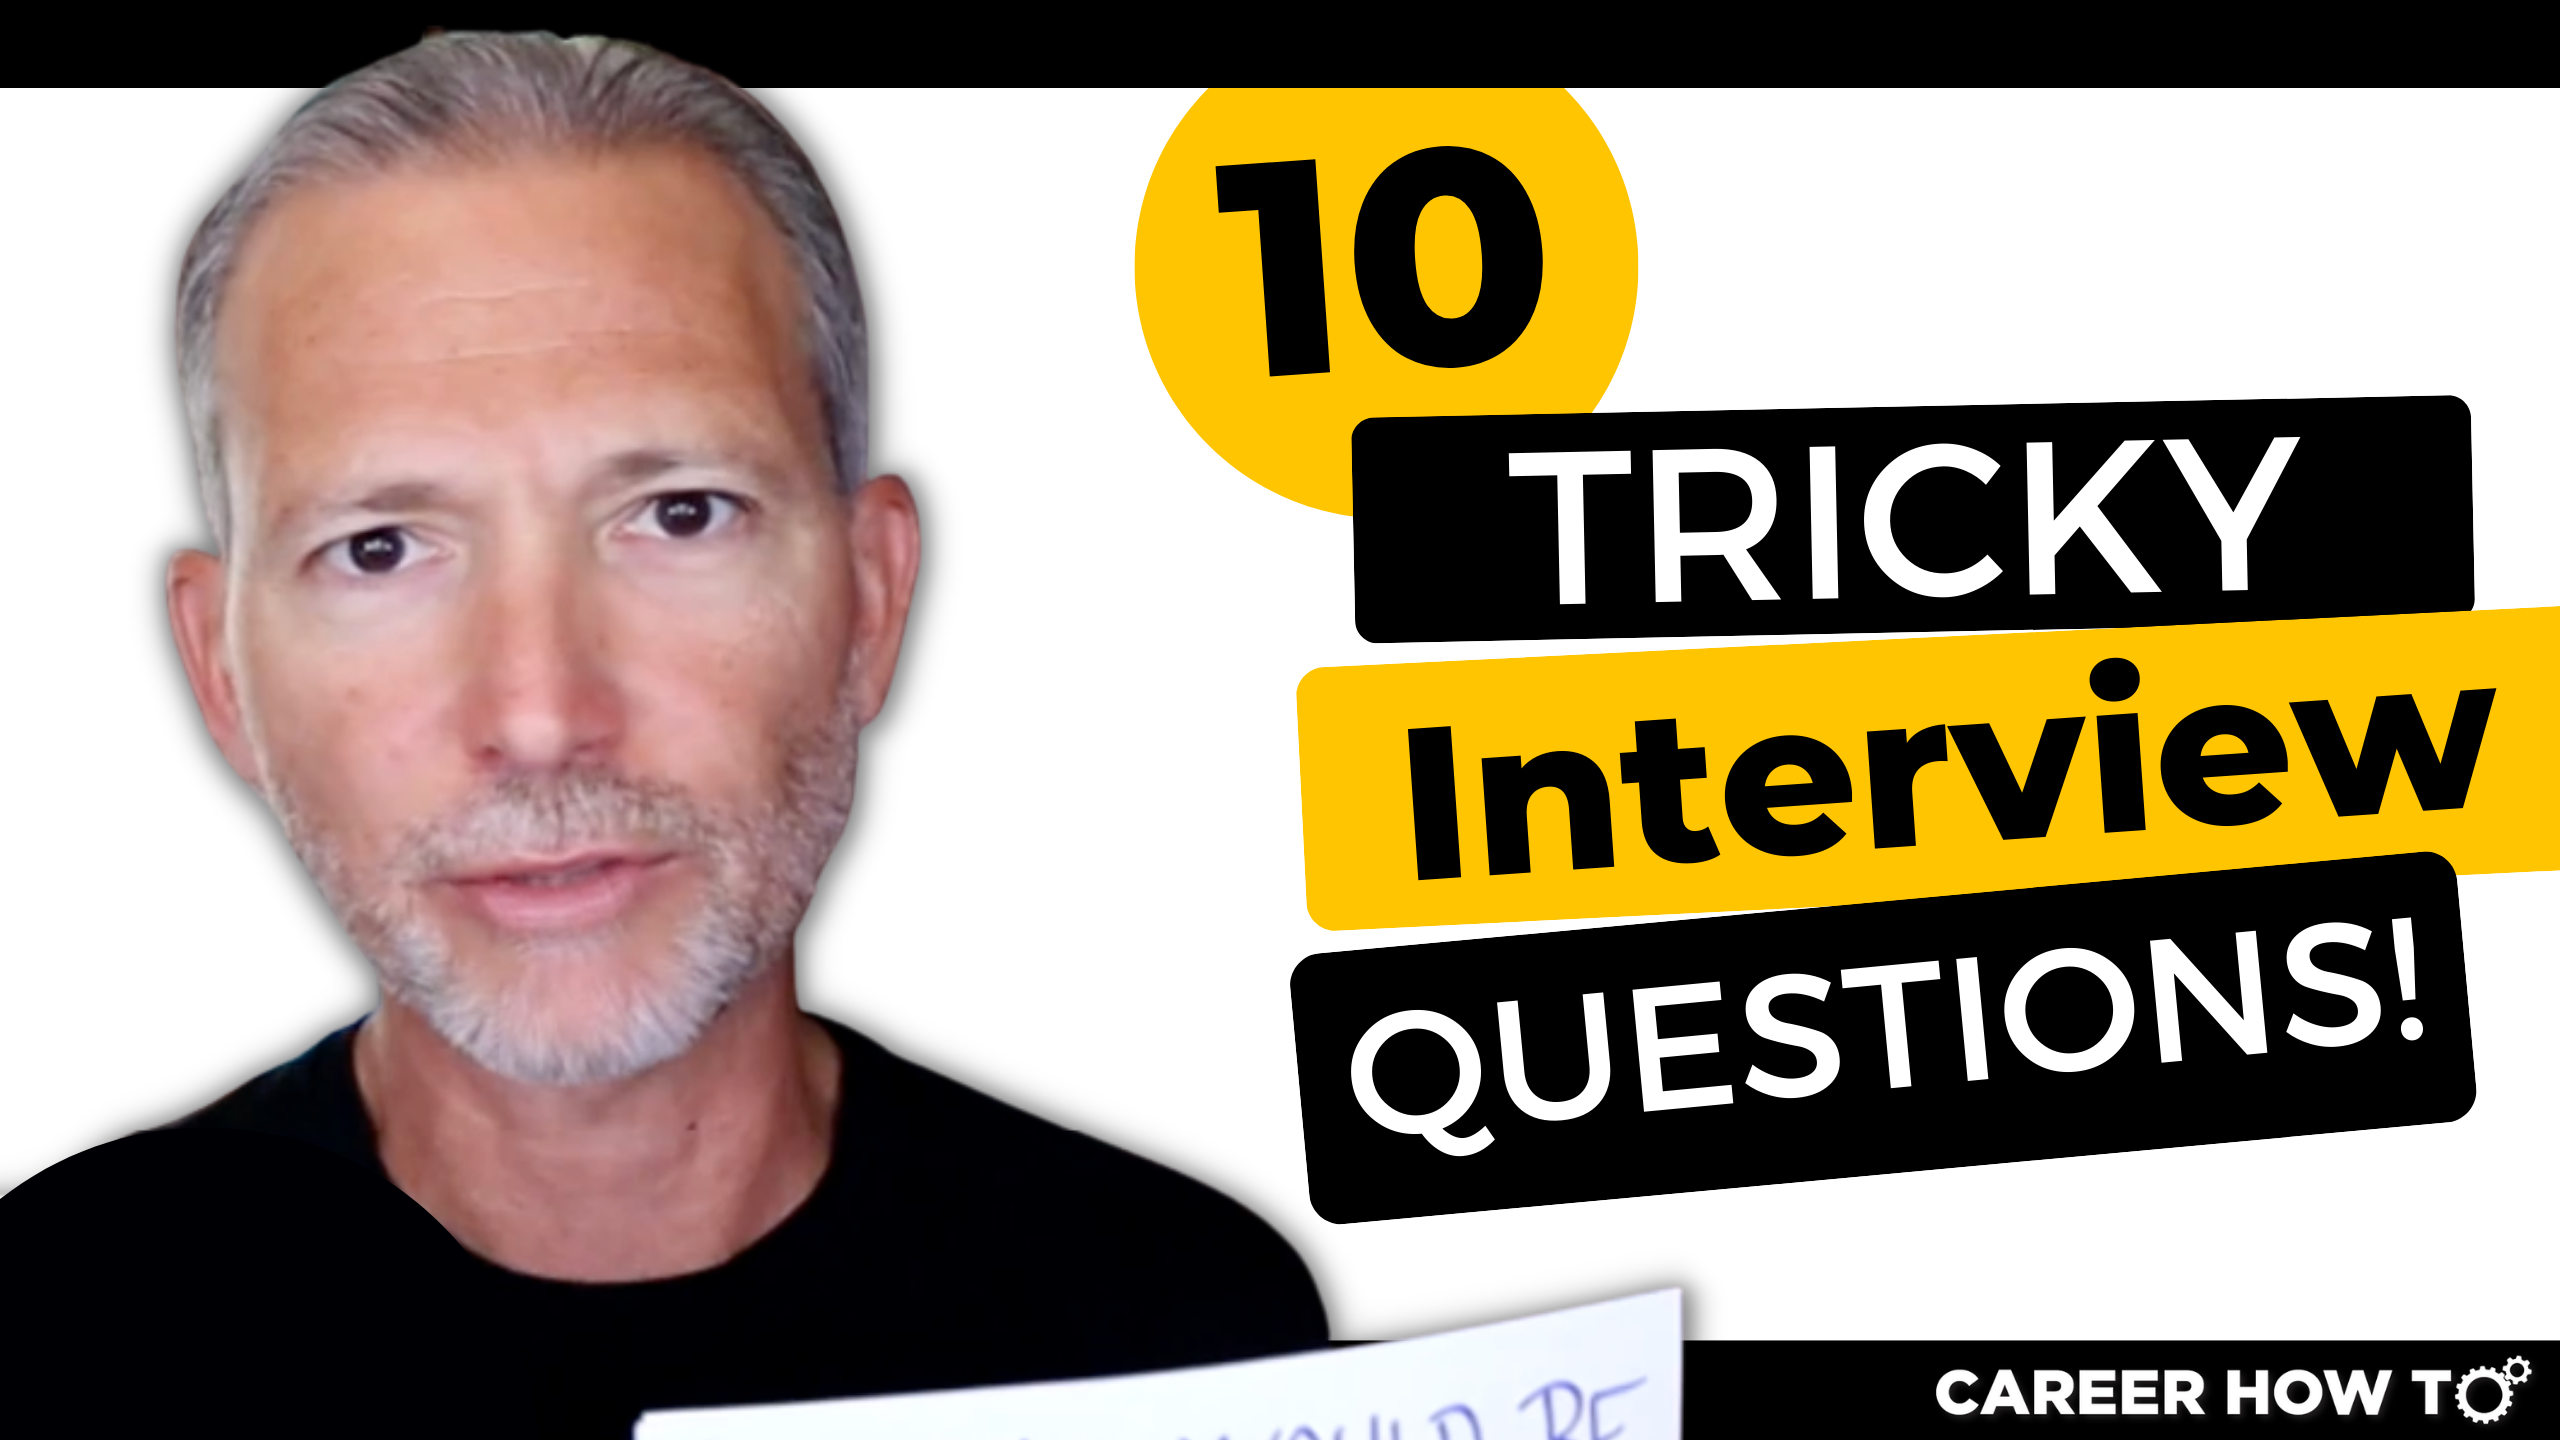 How to Answer These 10 Tricky Job Interview Questions